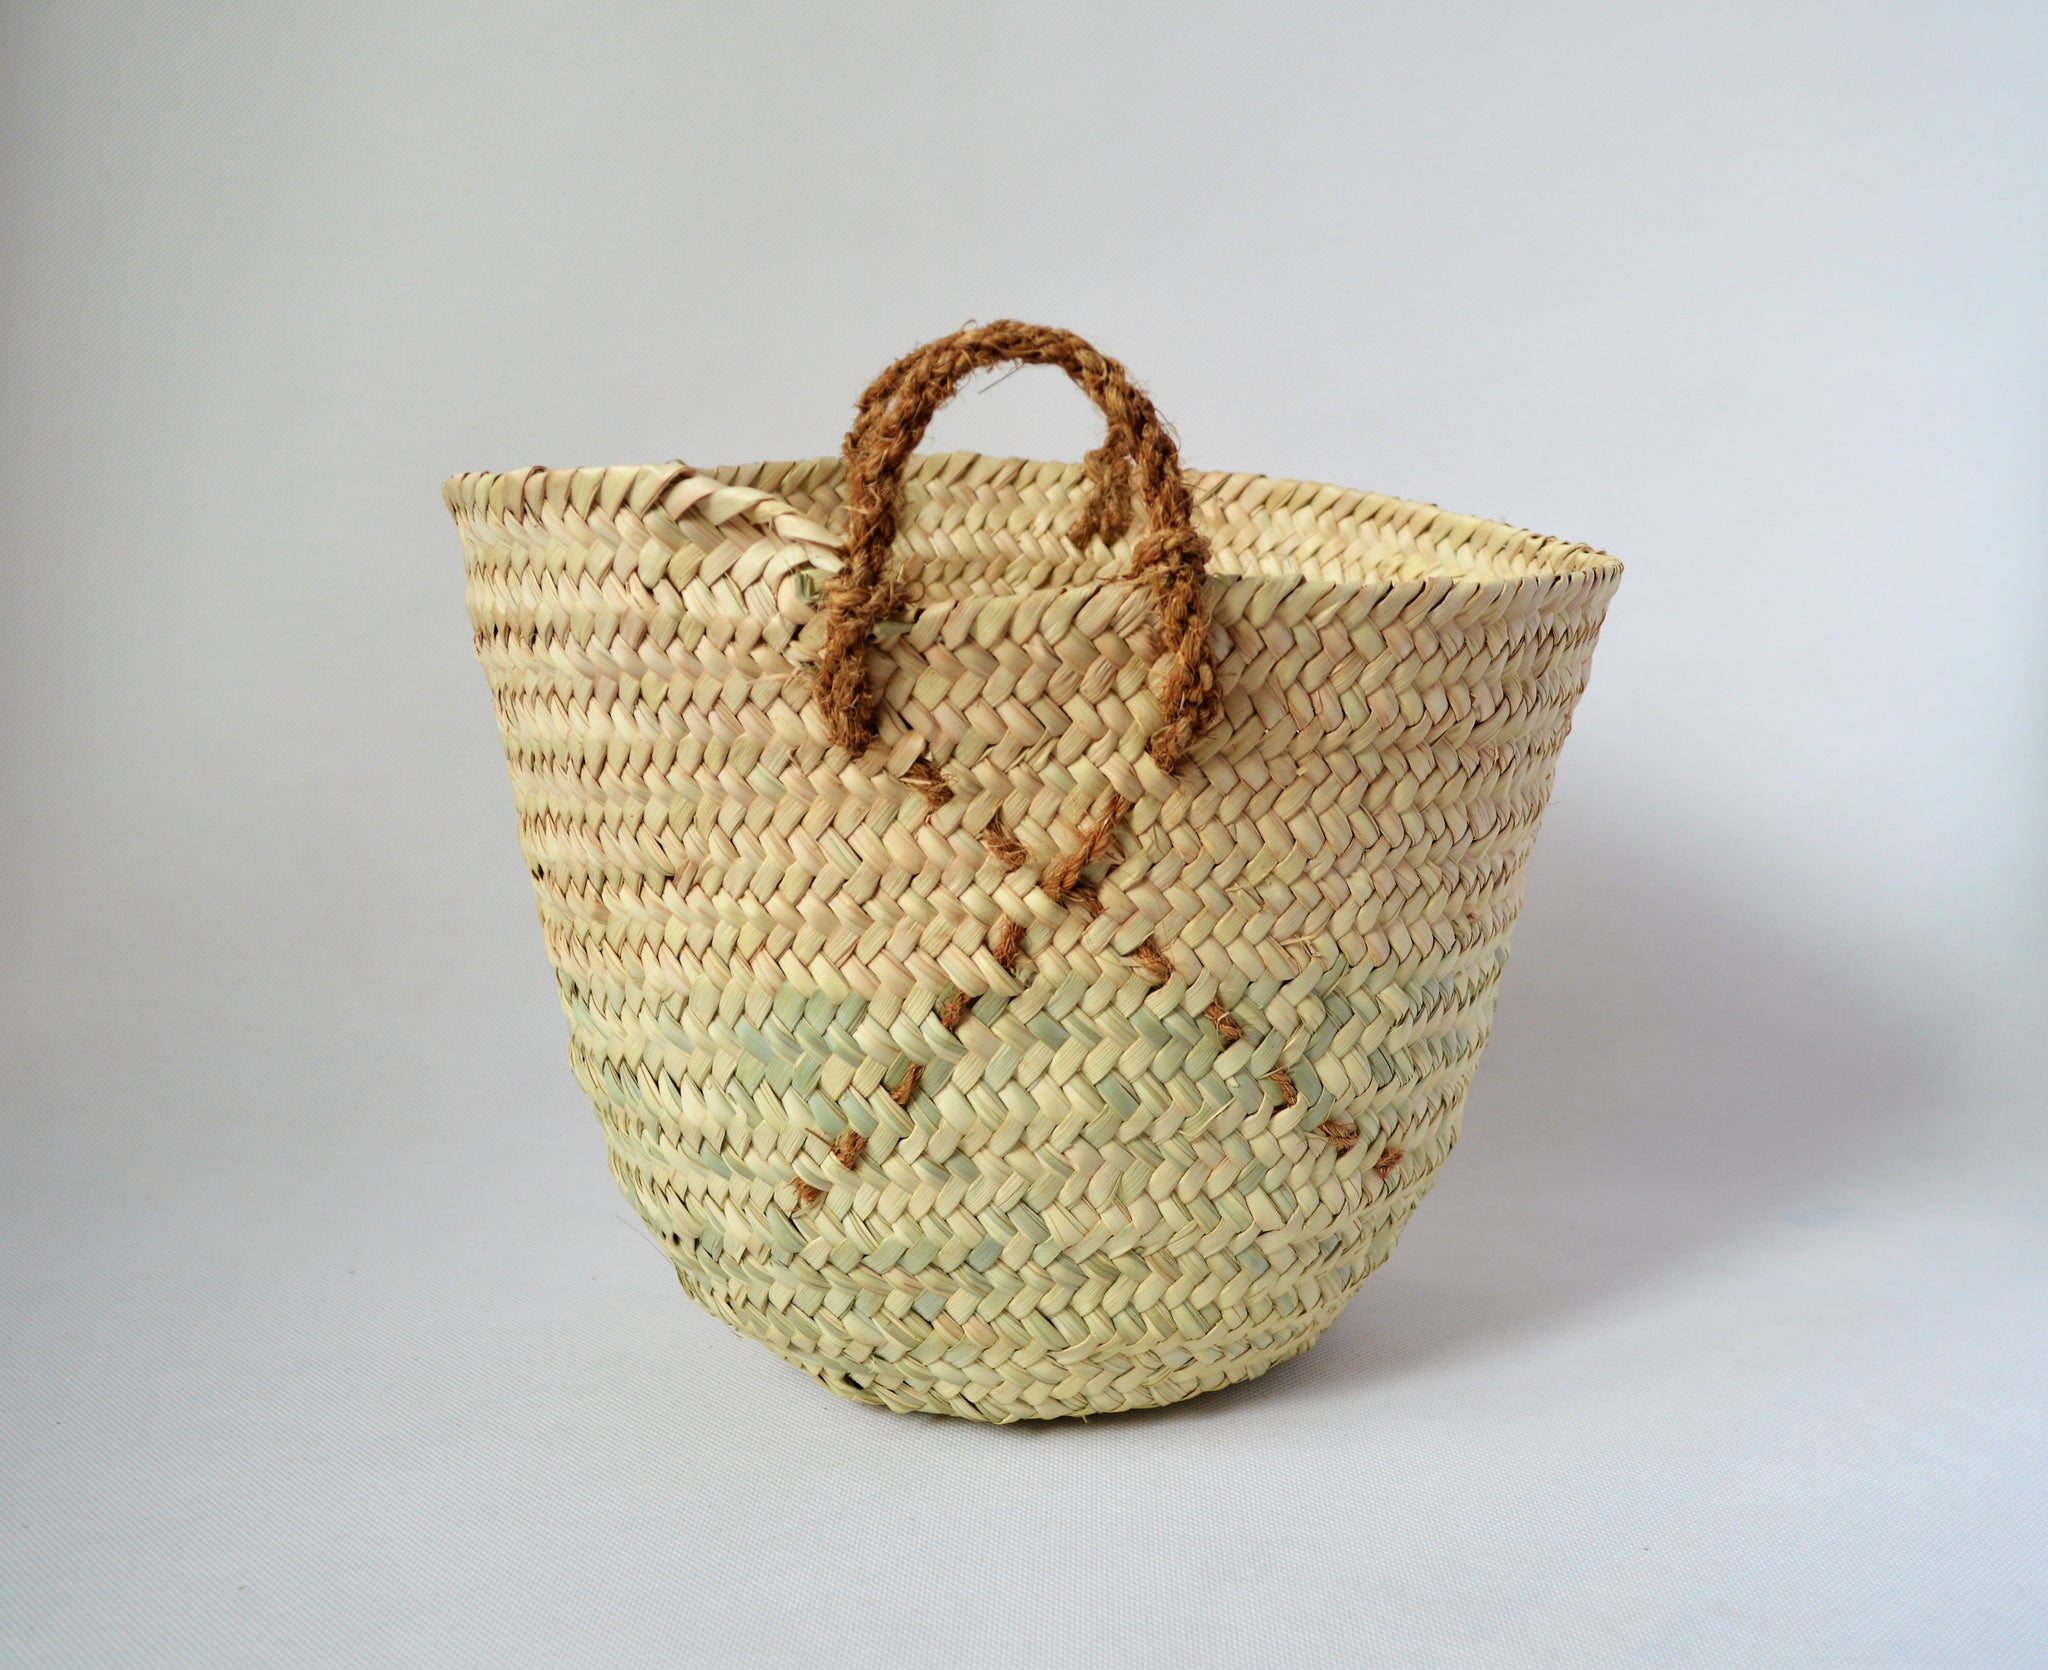 Natural palm straw basket with a strong natural handle from palm tree fibers